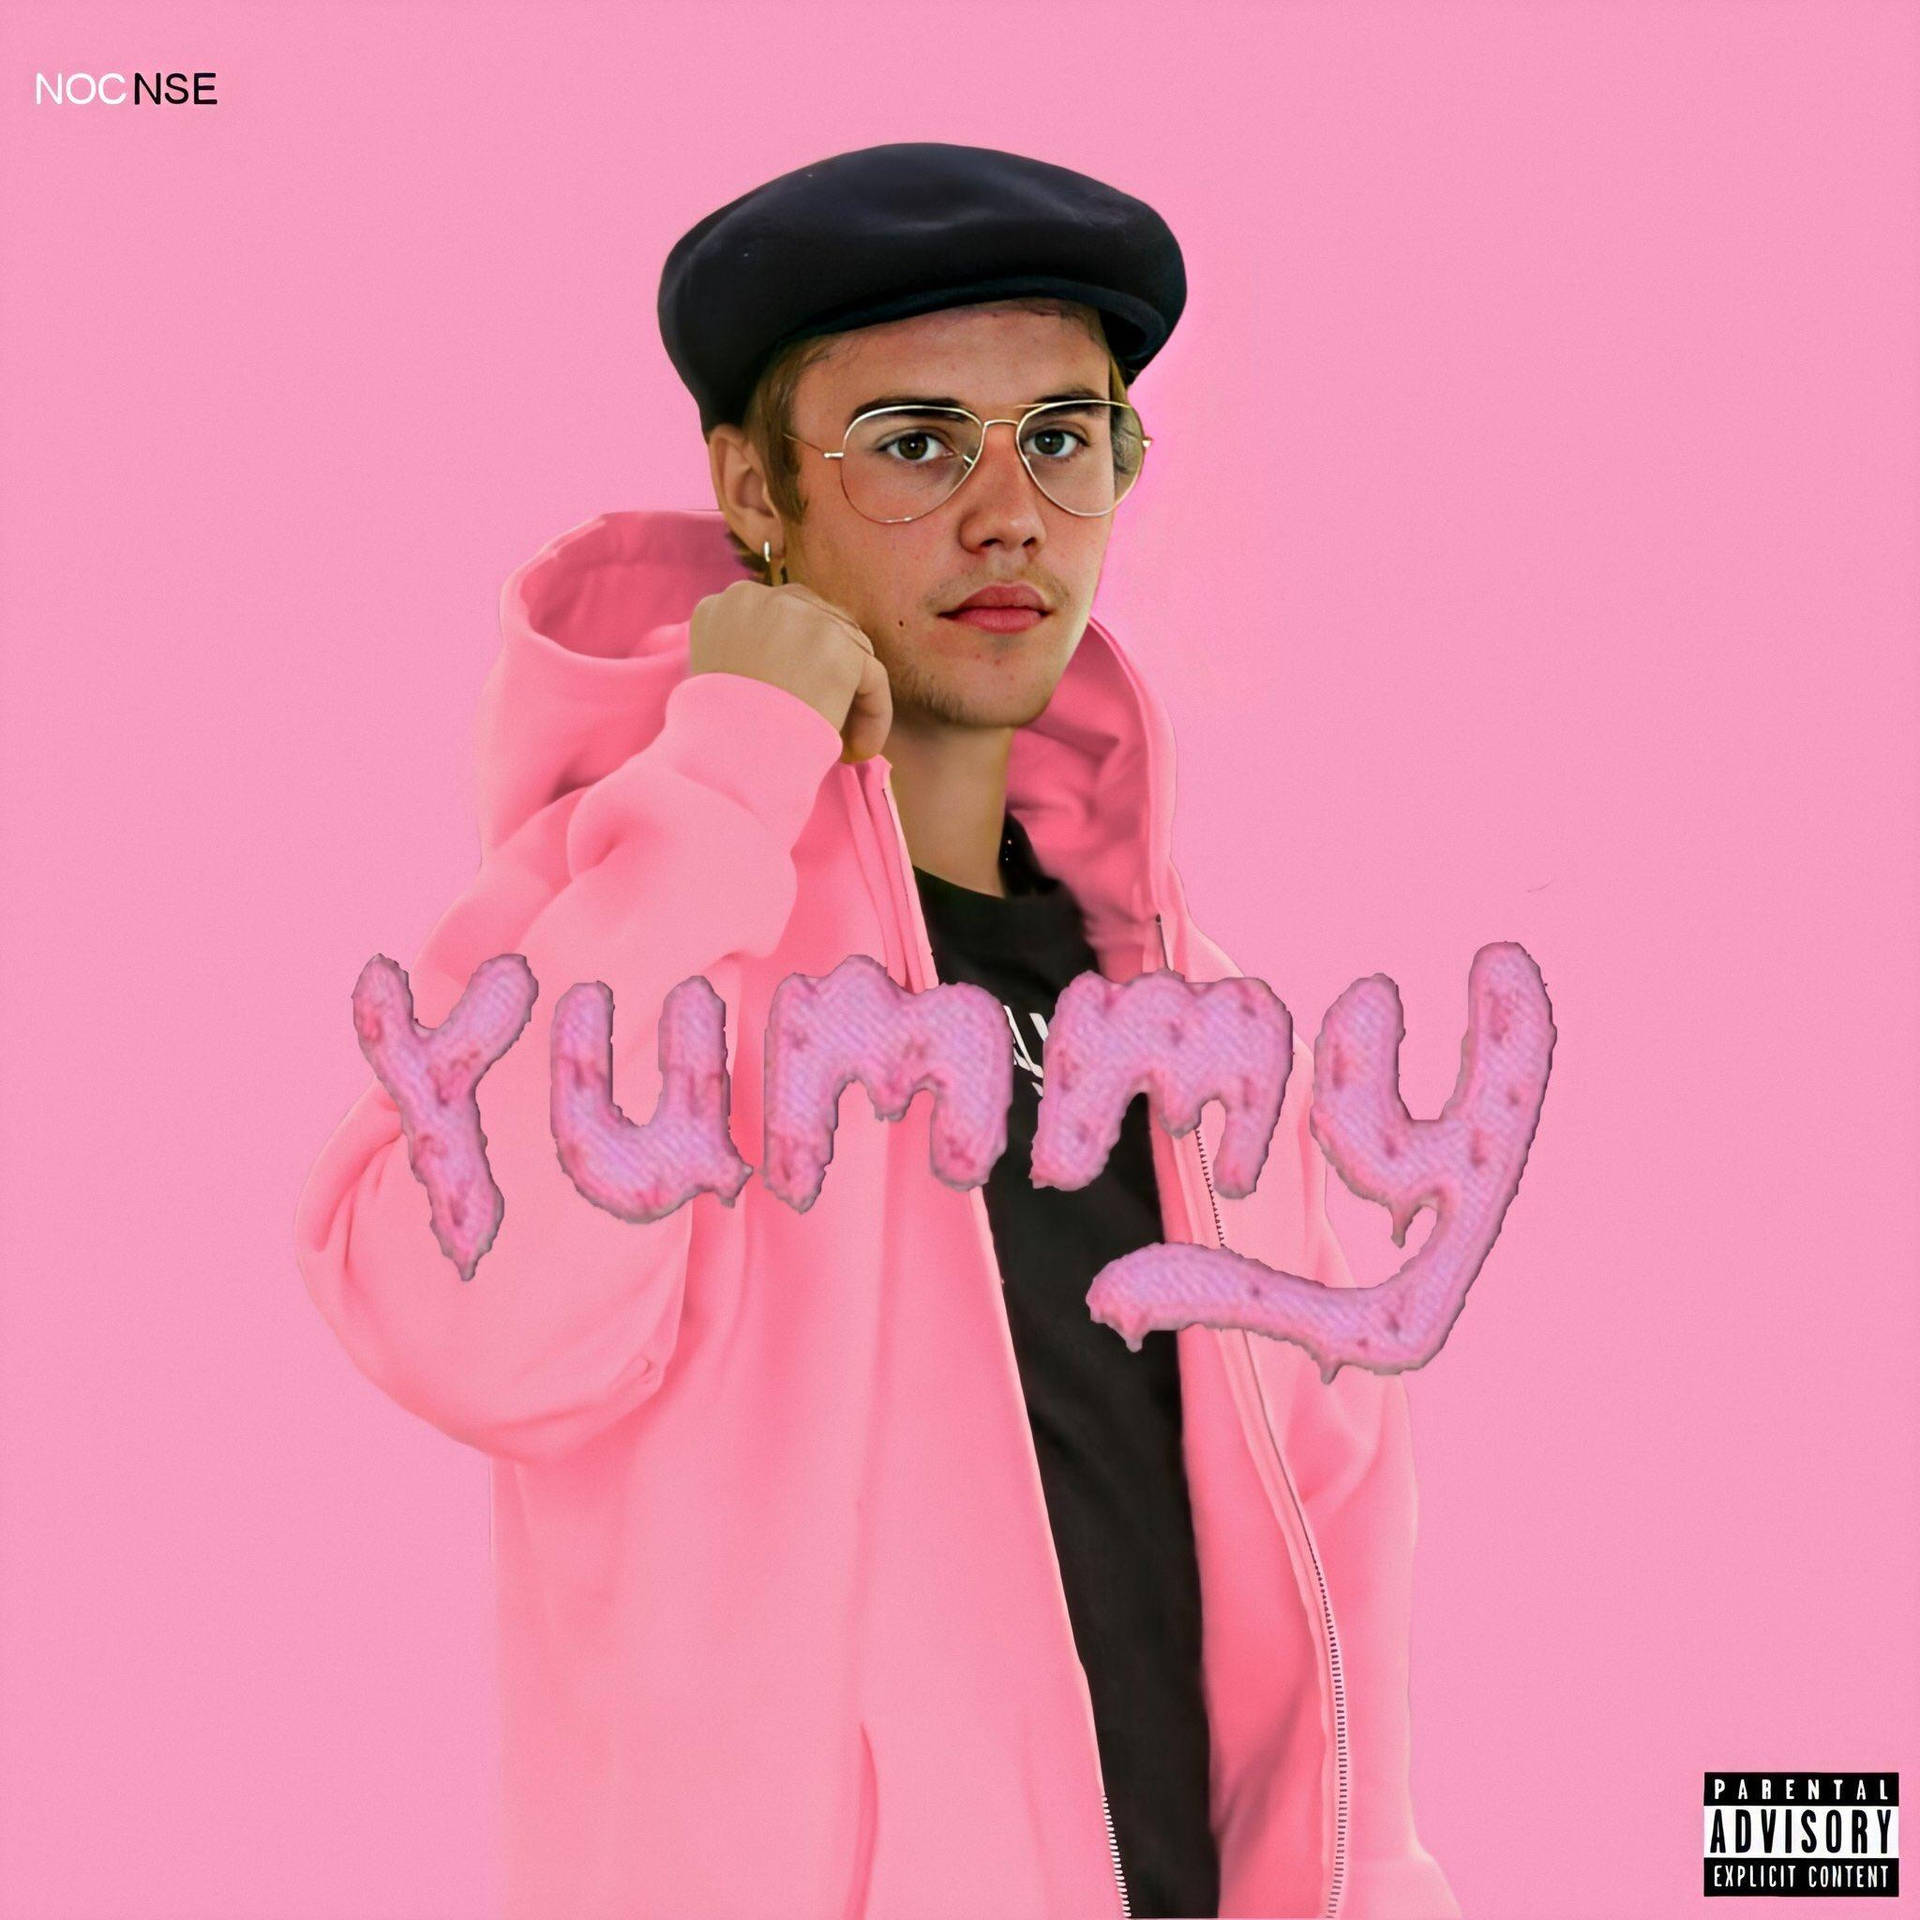 Justin Bieber Looking Yummy In Pink Background